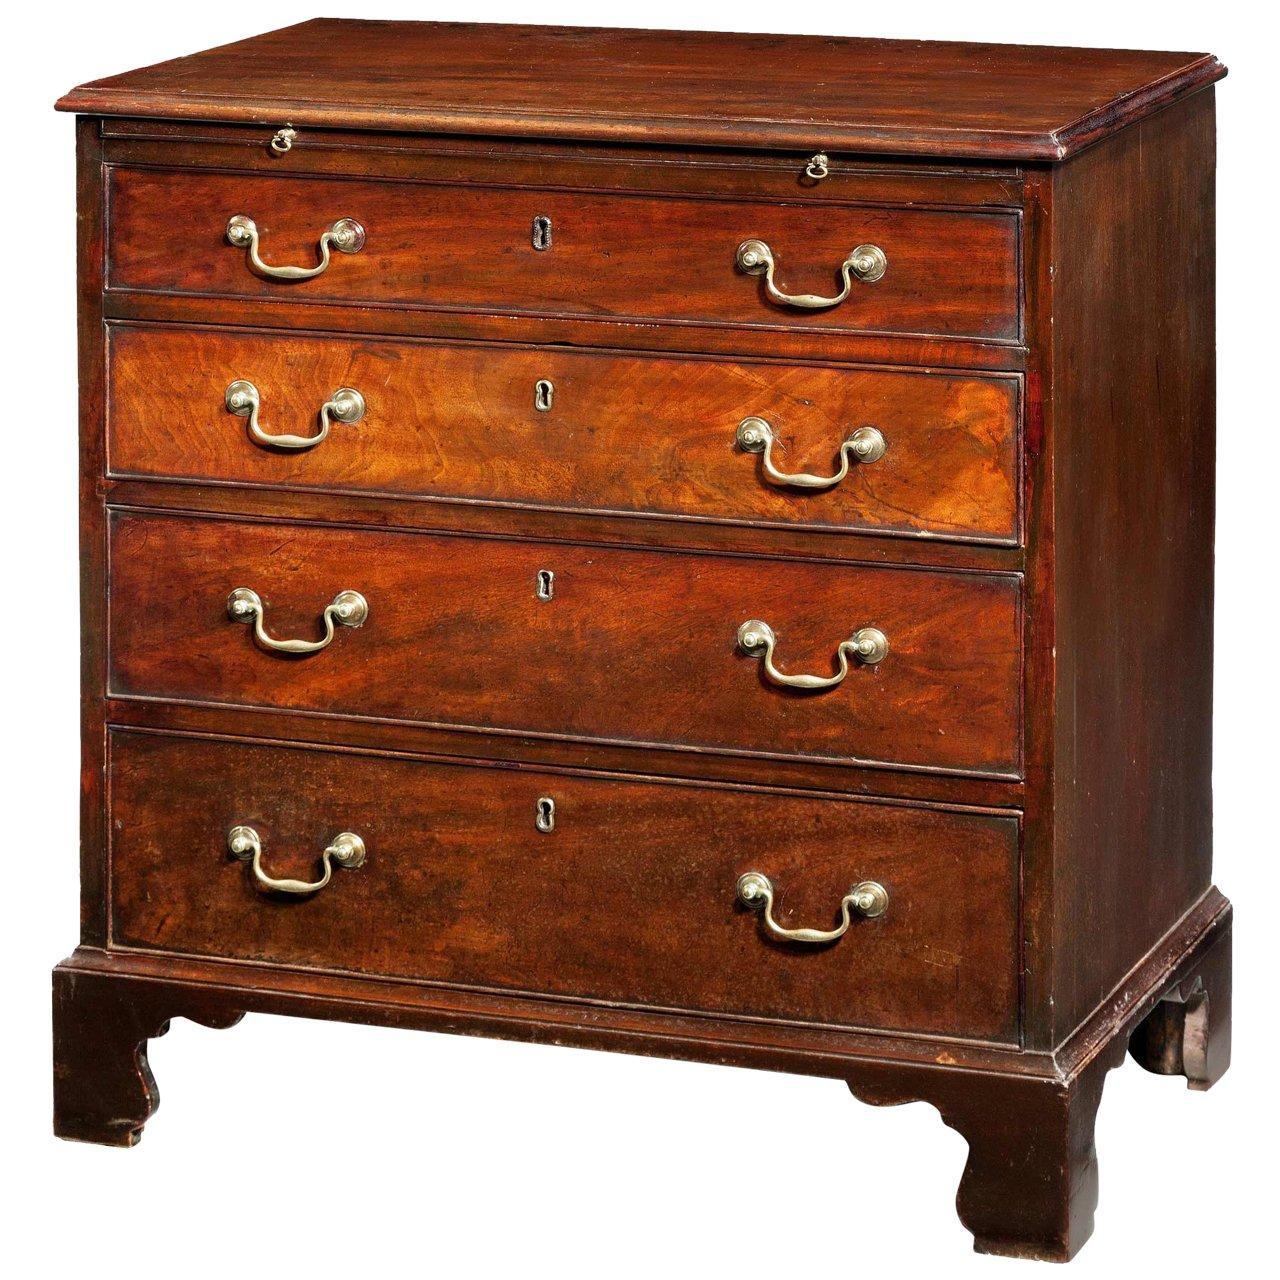 George III Period Mahogany Chest of Drawers with Dressing / Brushing Slide